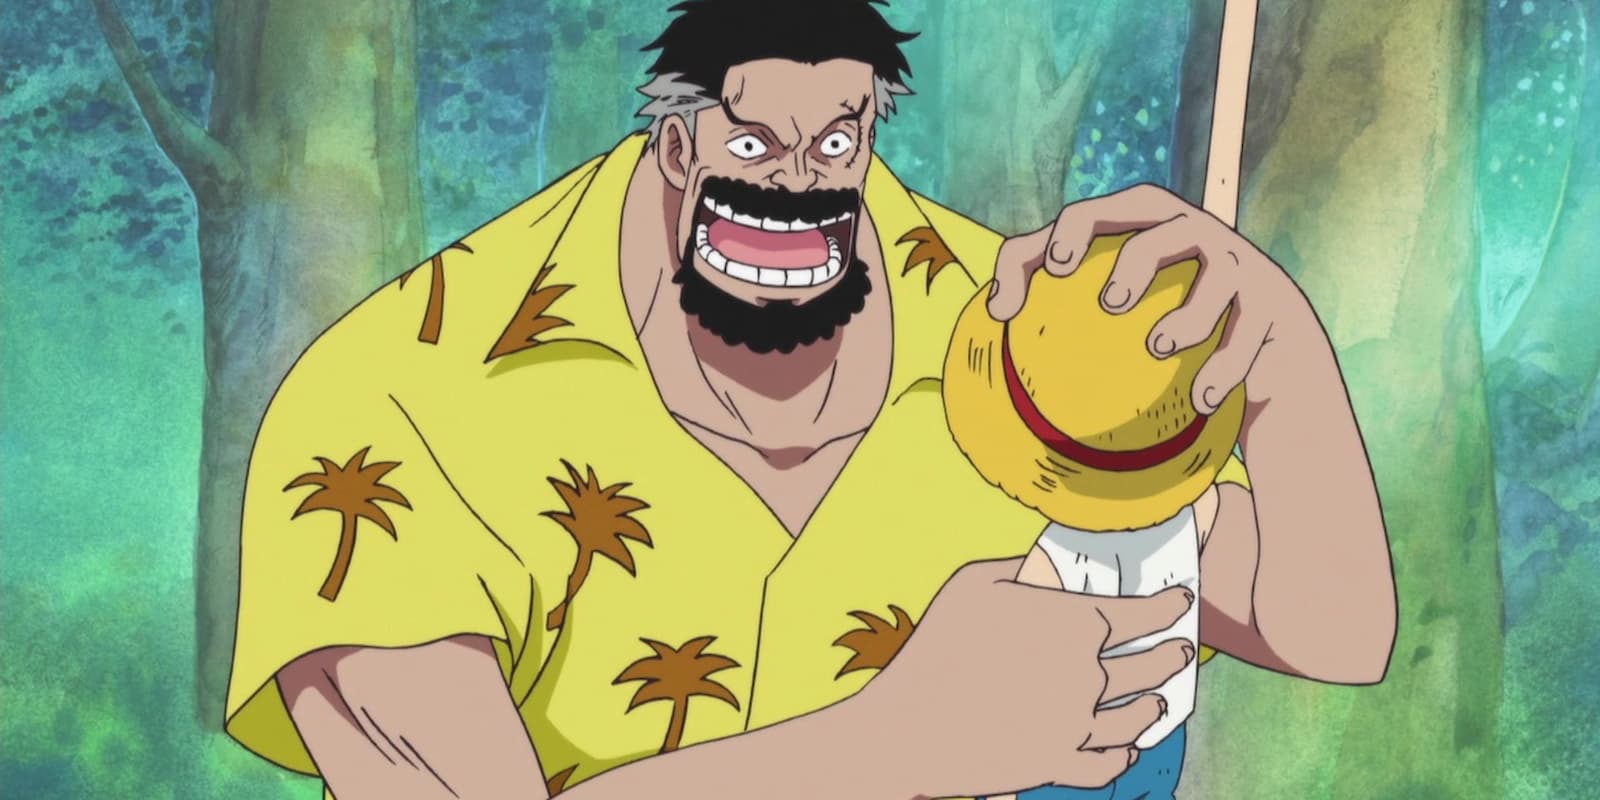 Vice Admiral Garp with a young Luffy